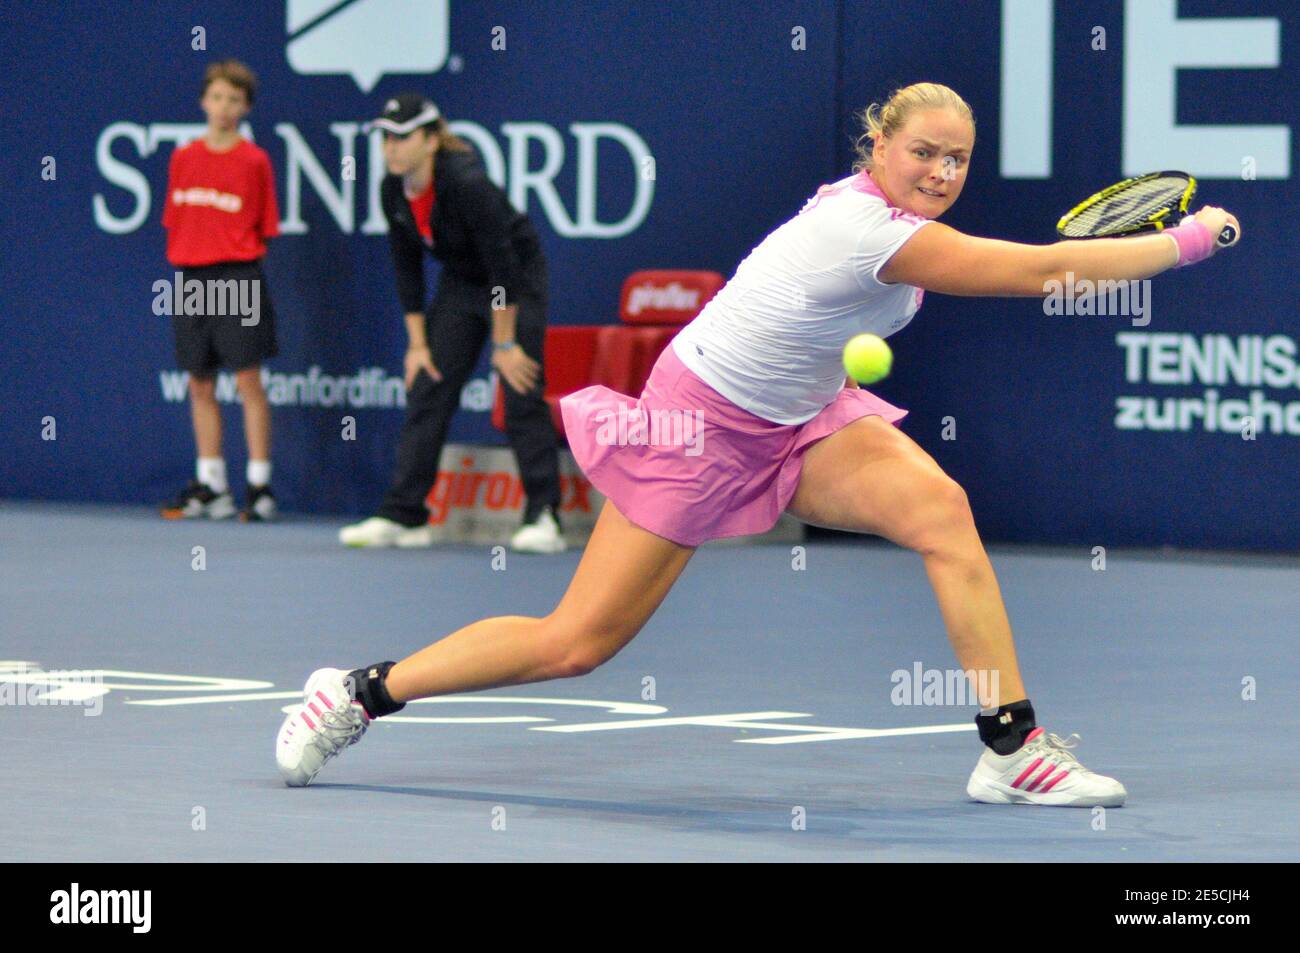 Germany's Anna-Lena Groenefeld in action during qualifying play at the Zurich Open in Zurich, Switzerland, on October 13, 2008. Photo by John C Middlebrook/Call Sport Media/Cameleon/ABACAPRESS.COM Stock Photo